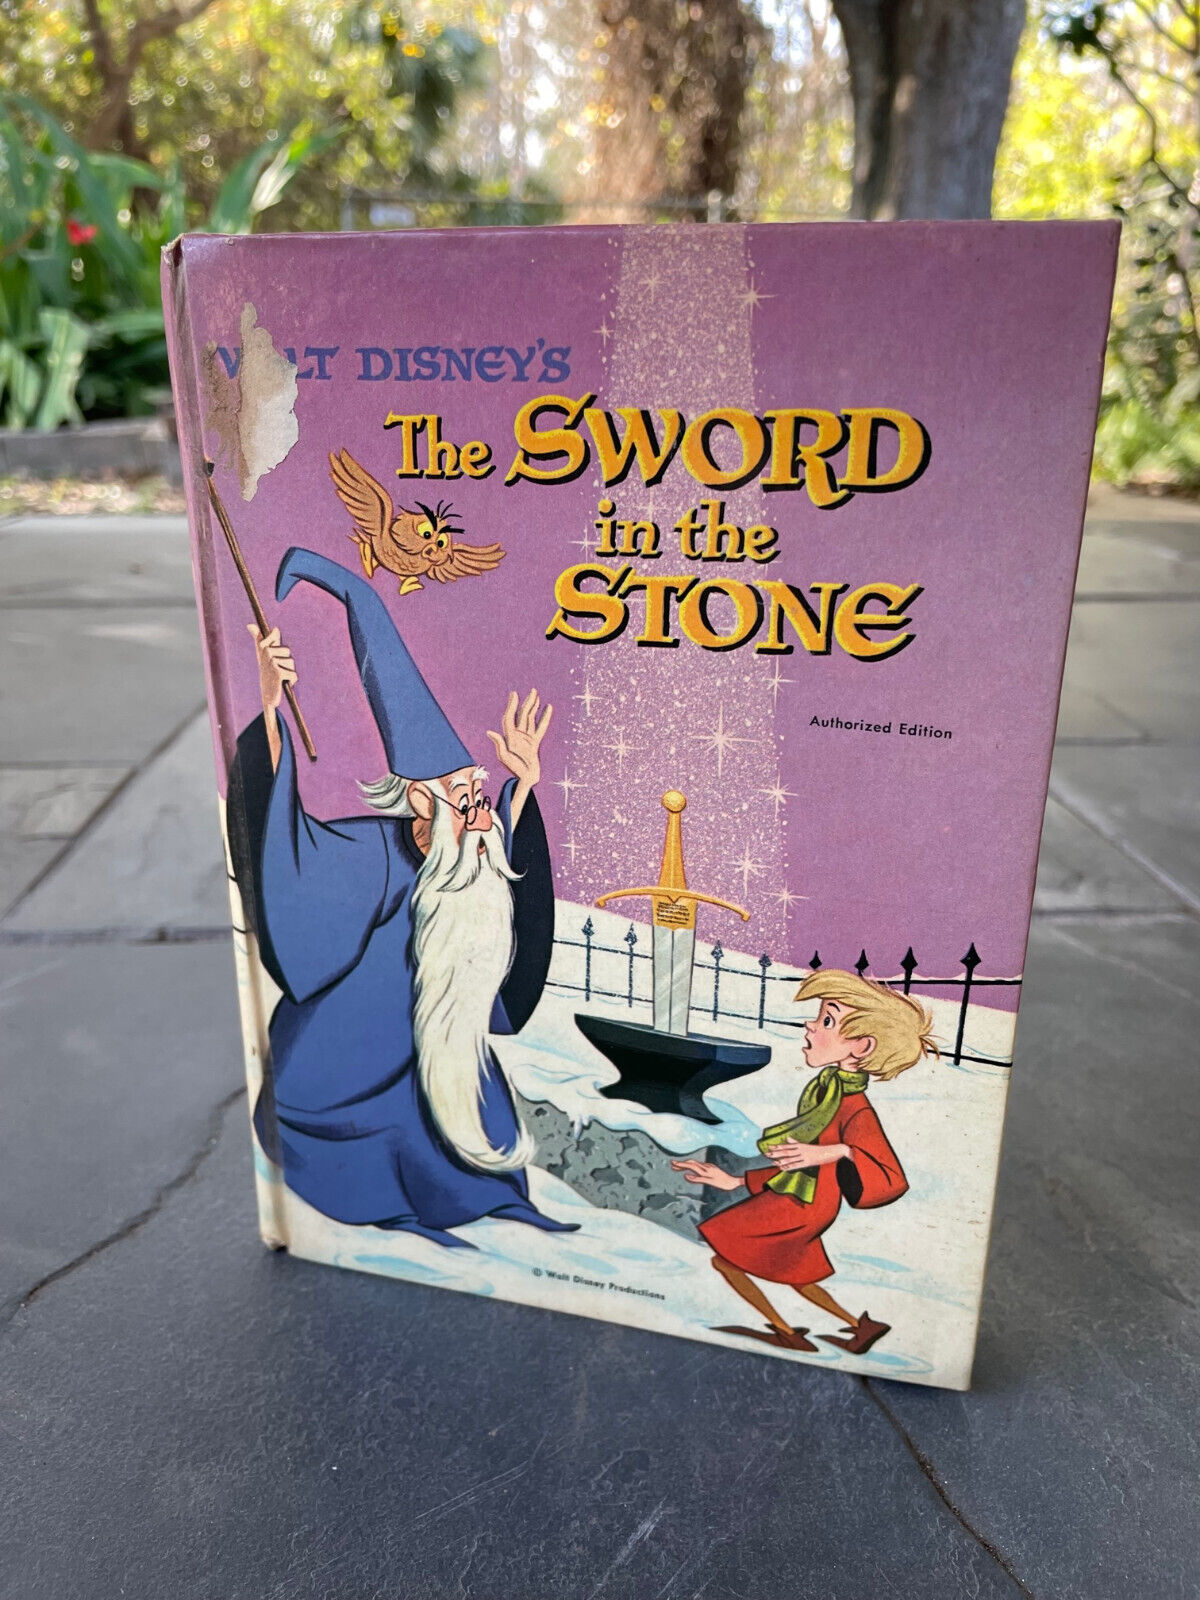 THE SWORD IN THE STONE BOOK 1963 AUTHORIZED EDITION WHITMAN WALT DISNEY